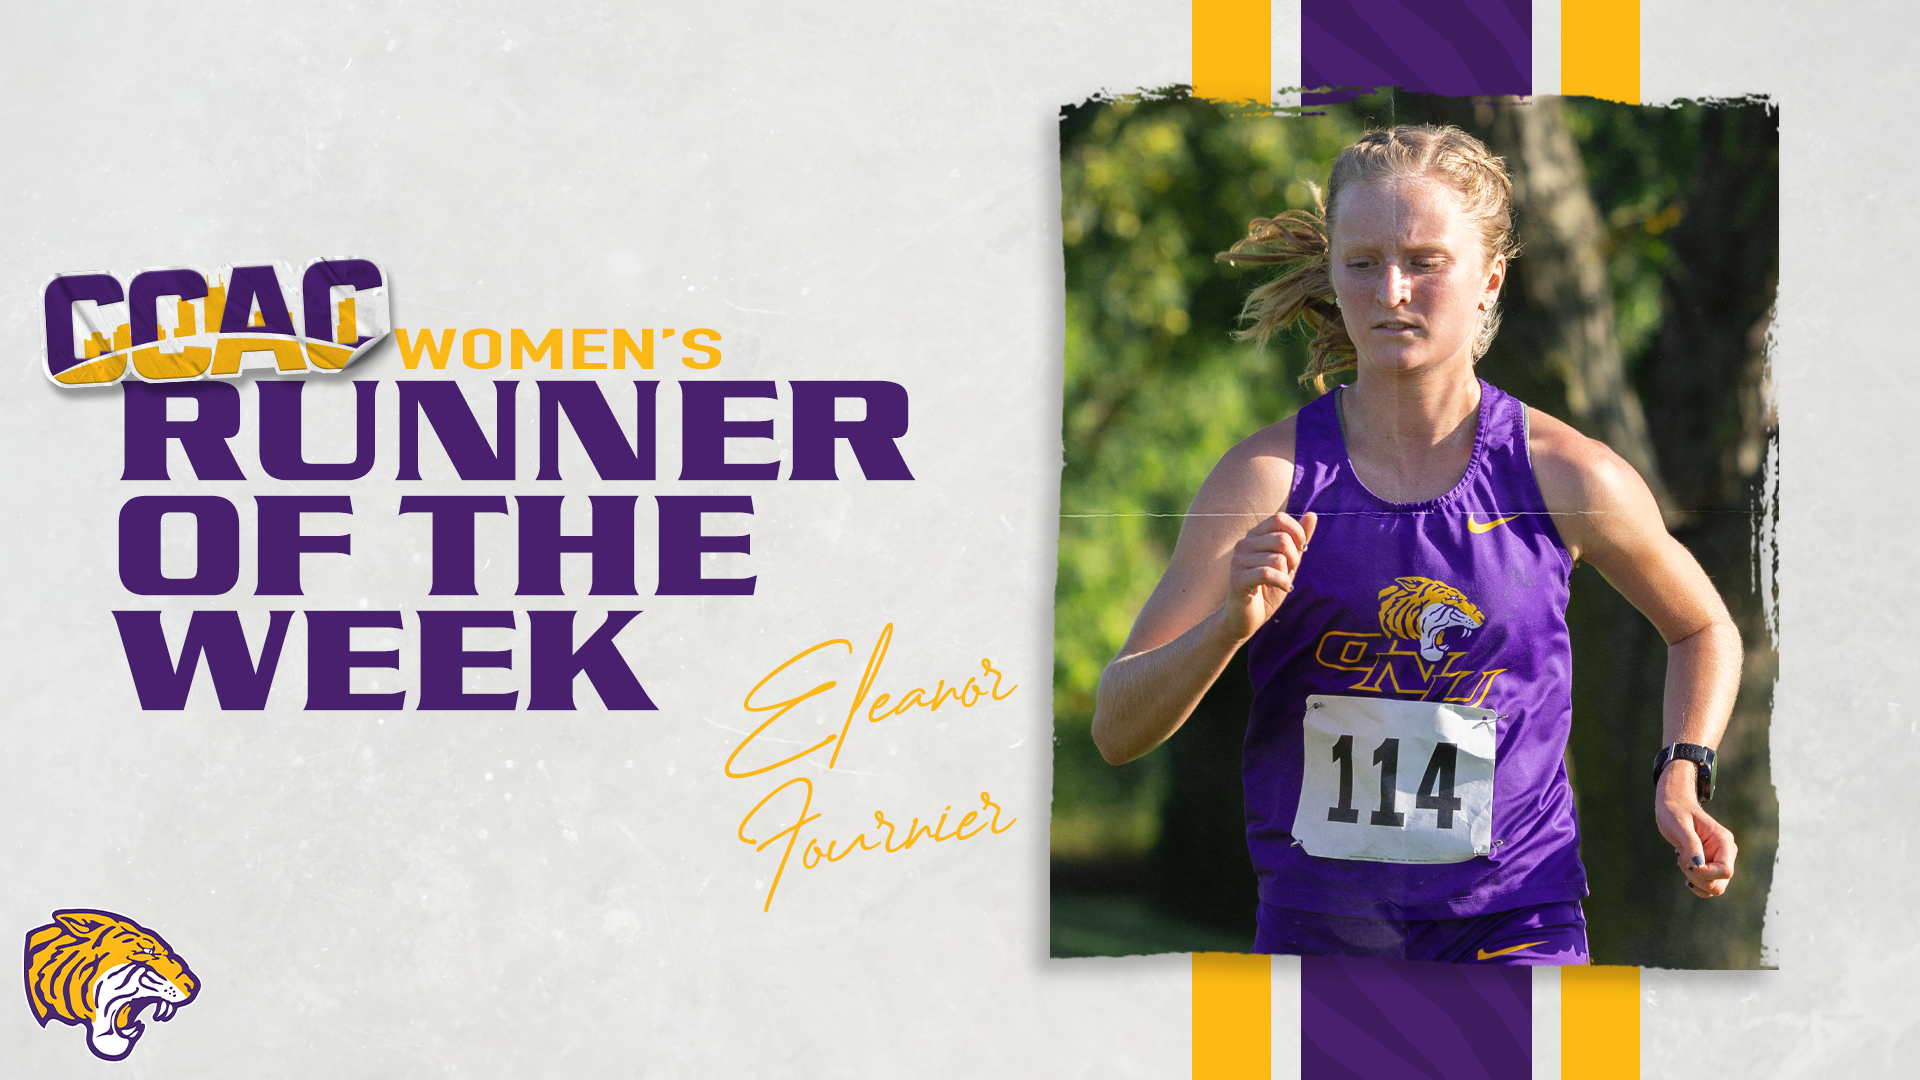 FOURNIER NETS CCAC XC RUNNER OF THE WEEK ACCORD